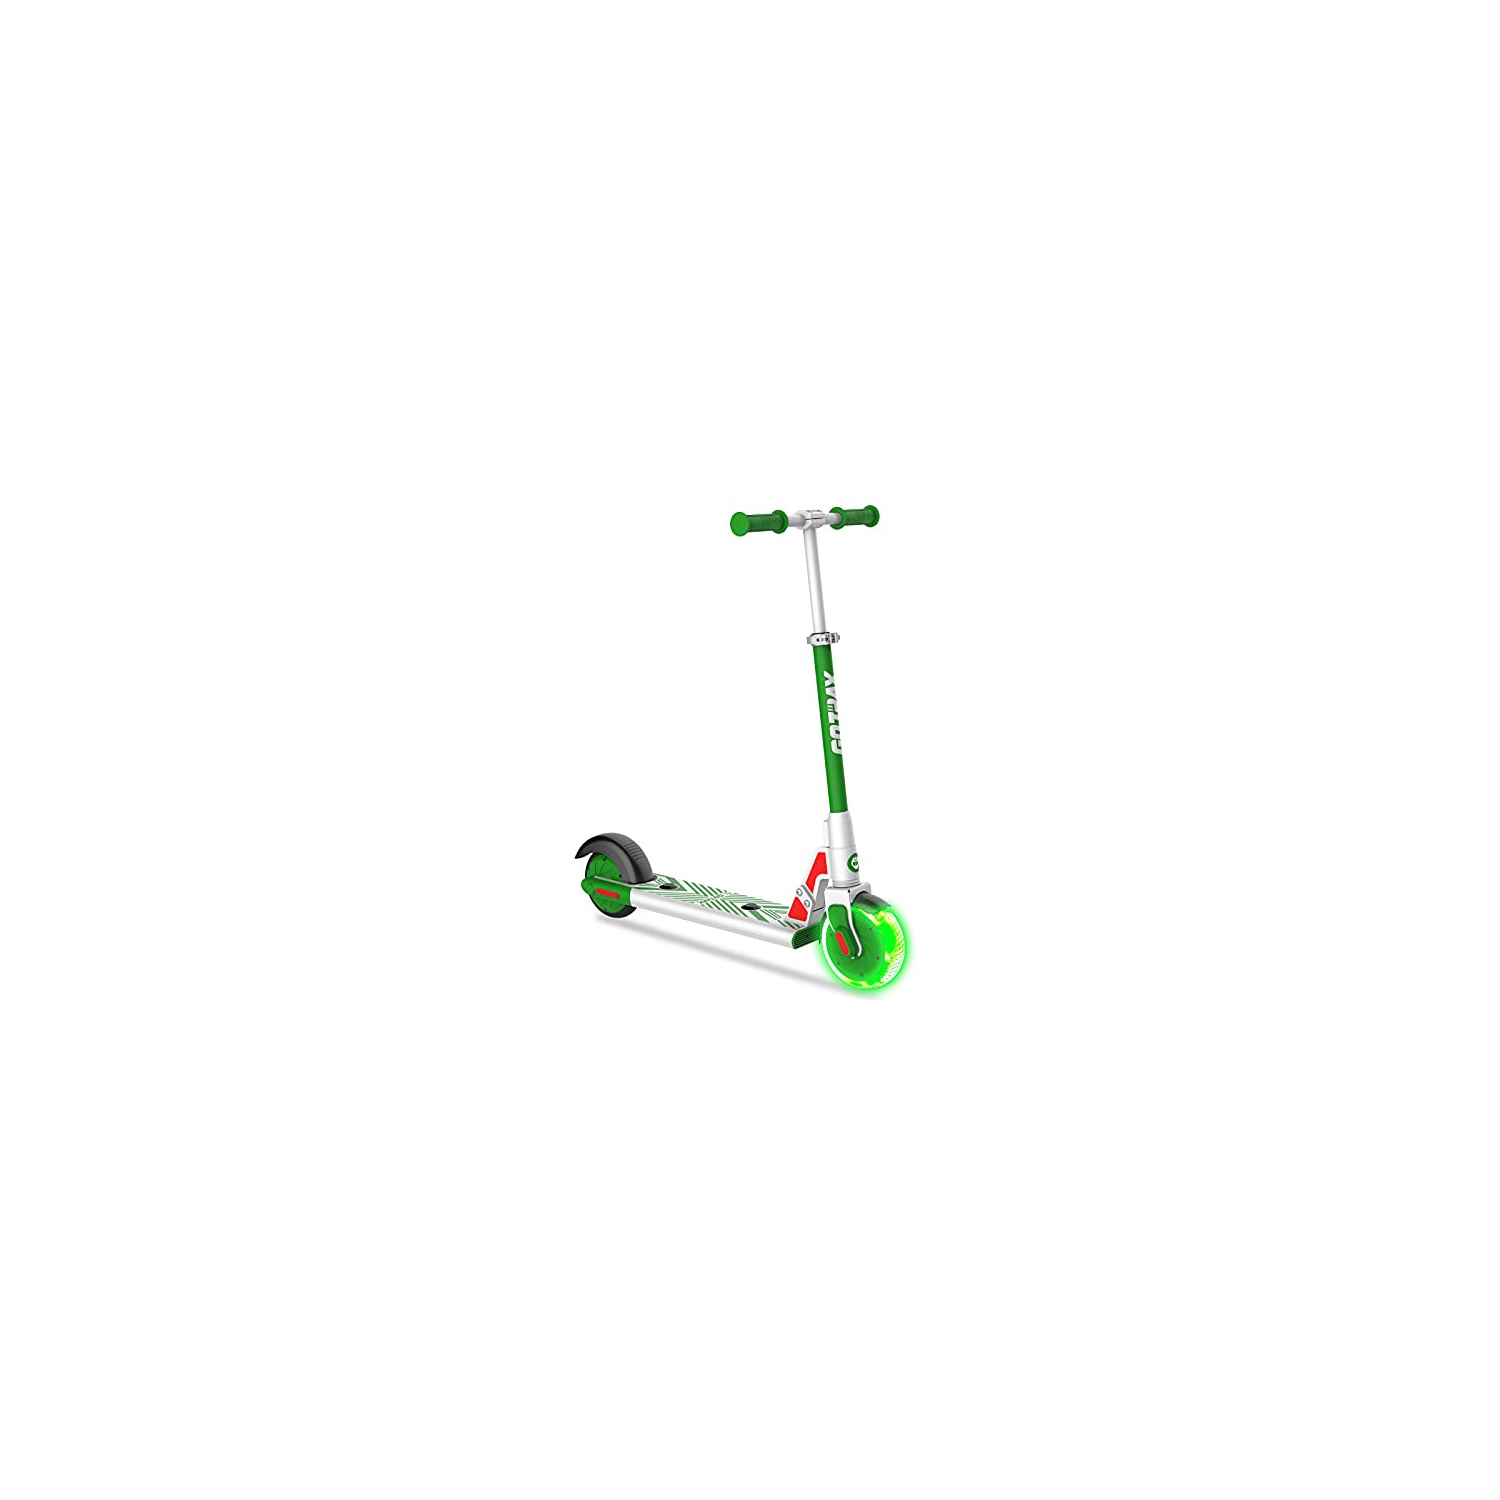 GOTRAX GKS LUMIOS Electric Scooter for Kids 6-12, 150W Motor and 25.2V 2.6Ah Lithium Battery, 6" LED Luminous Front Wheel and 3 Adjustable Heights, Safety UL2272 Certified(Green)